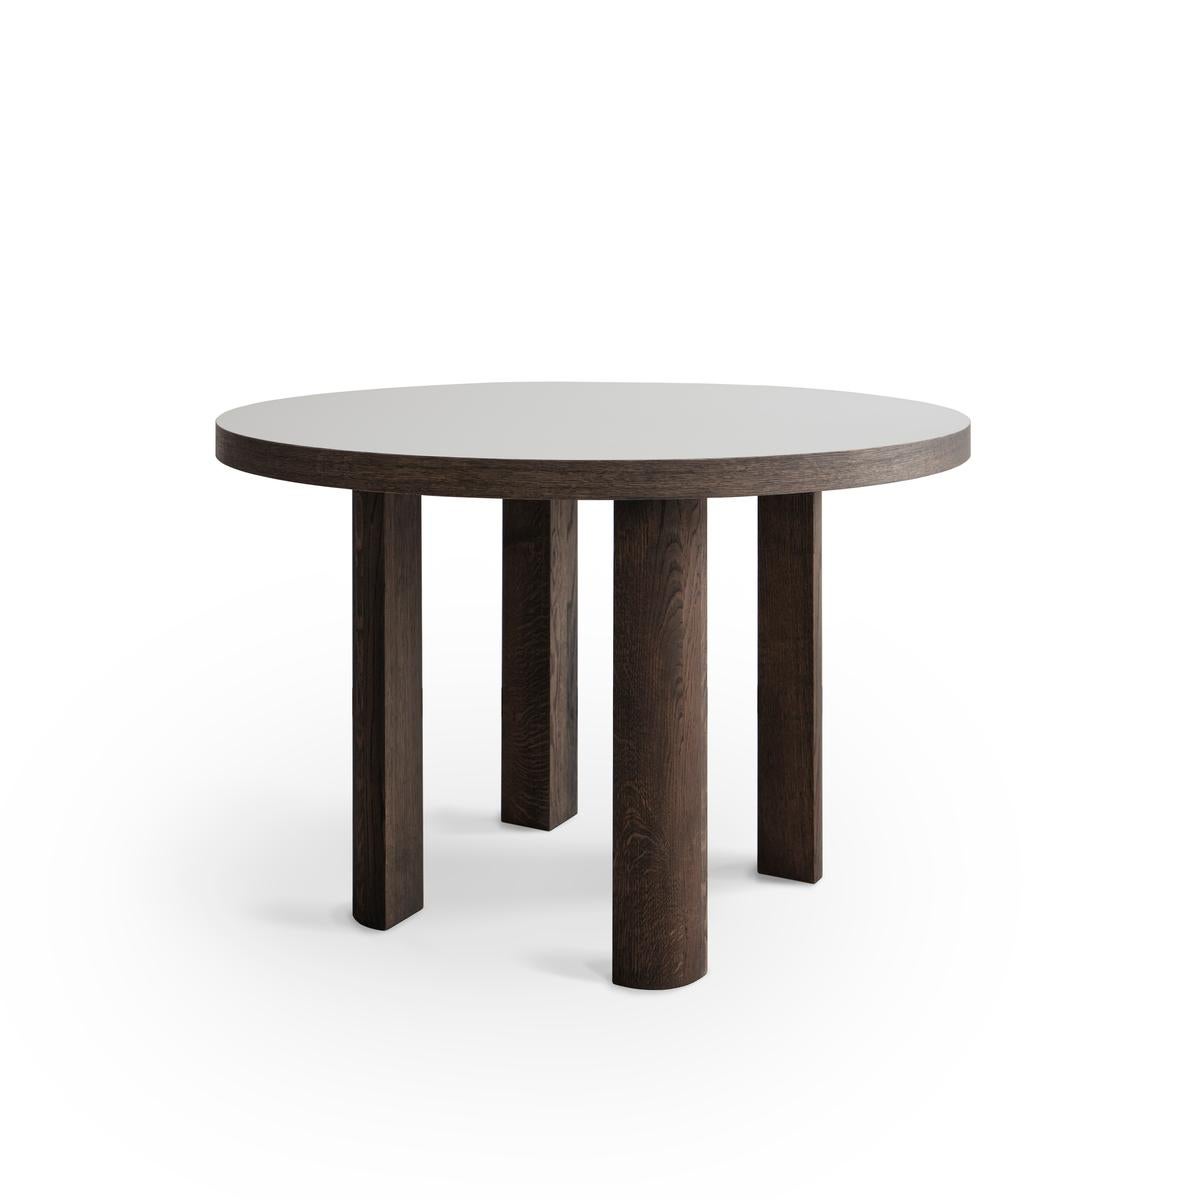 'QUARTER' Round table
Designed by IDA L. HILDEBRAND

Dimensions: DIA. 120 cm / H. 75 cm / Top thickness 5 cm
Model in the picture : Smoked Oak - White laminated tabletop 

FRIENDS FOUNDERS create contemporary designs with strong focuses on